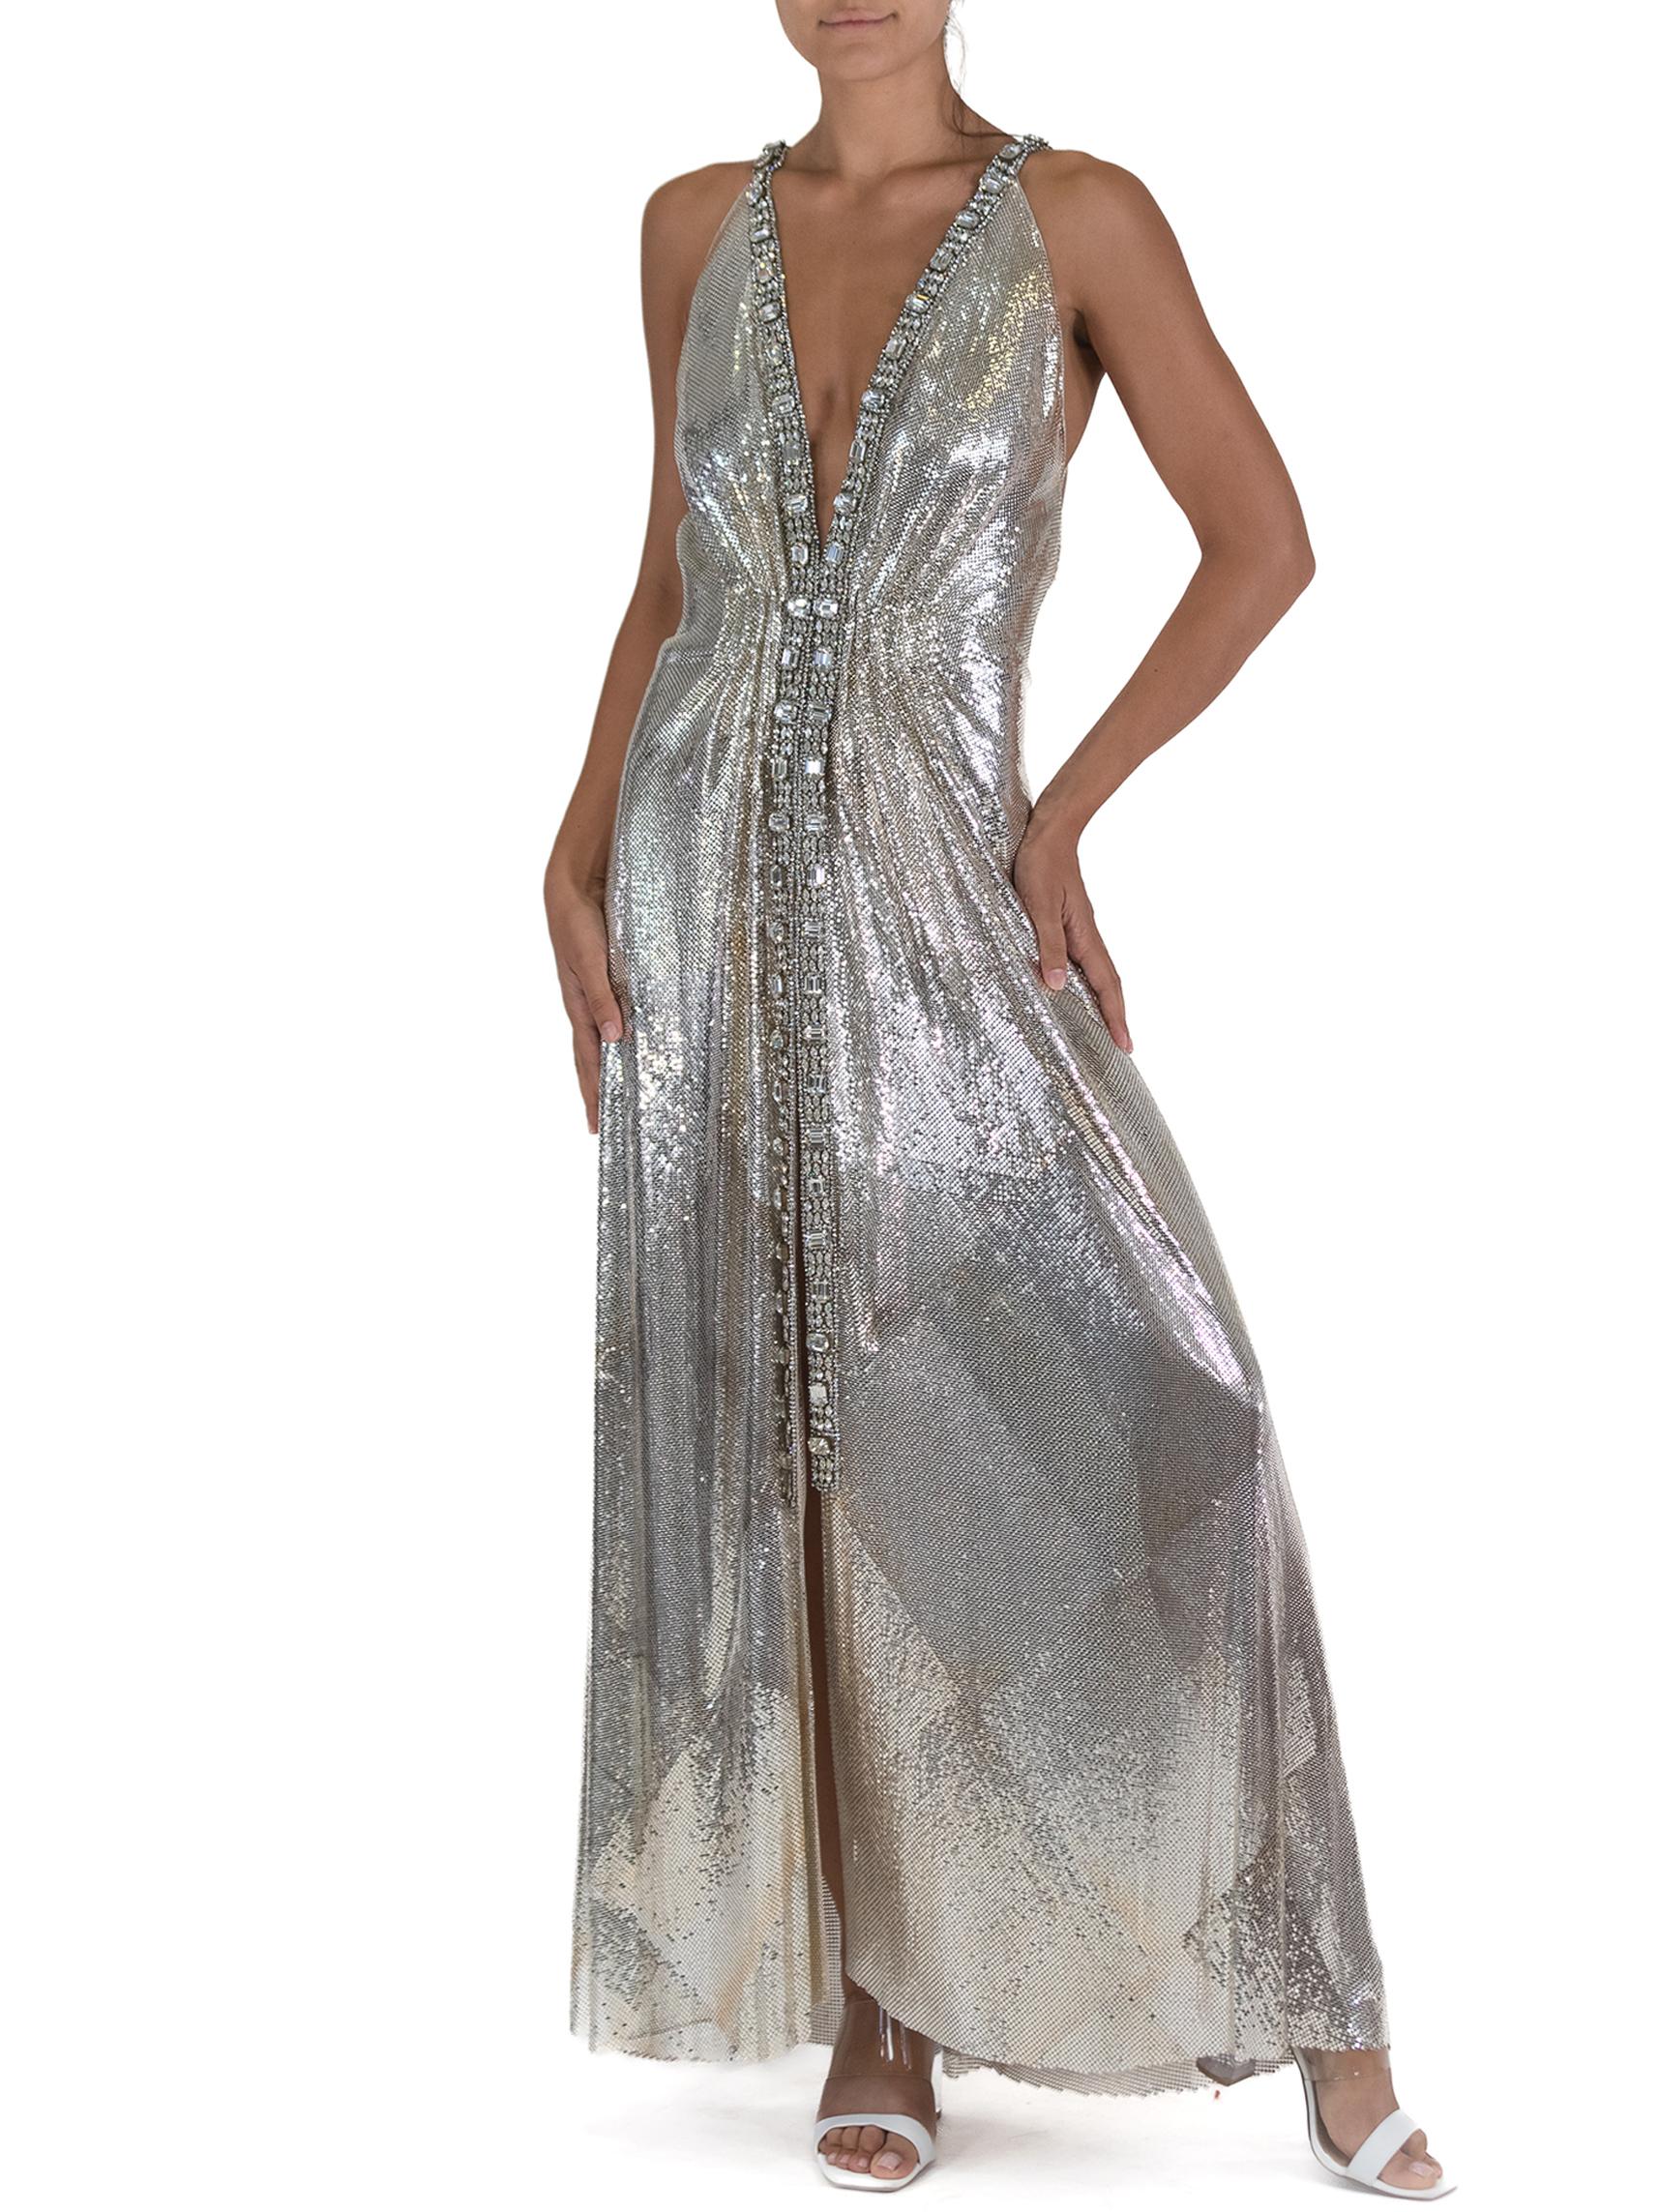 Morphew Atelier Silver Metal Chainlink Gown With Vintage Haute Couture Christia In Excellent Condition For Sale In New York, NY